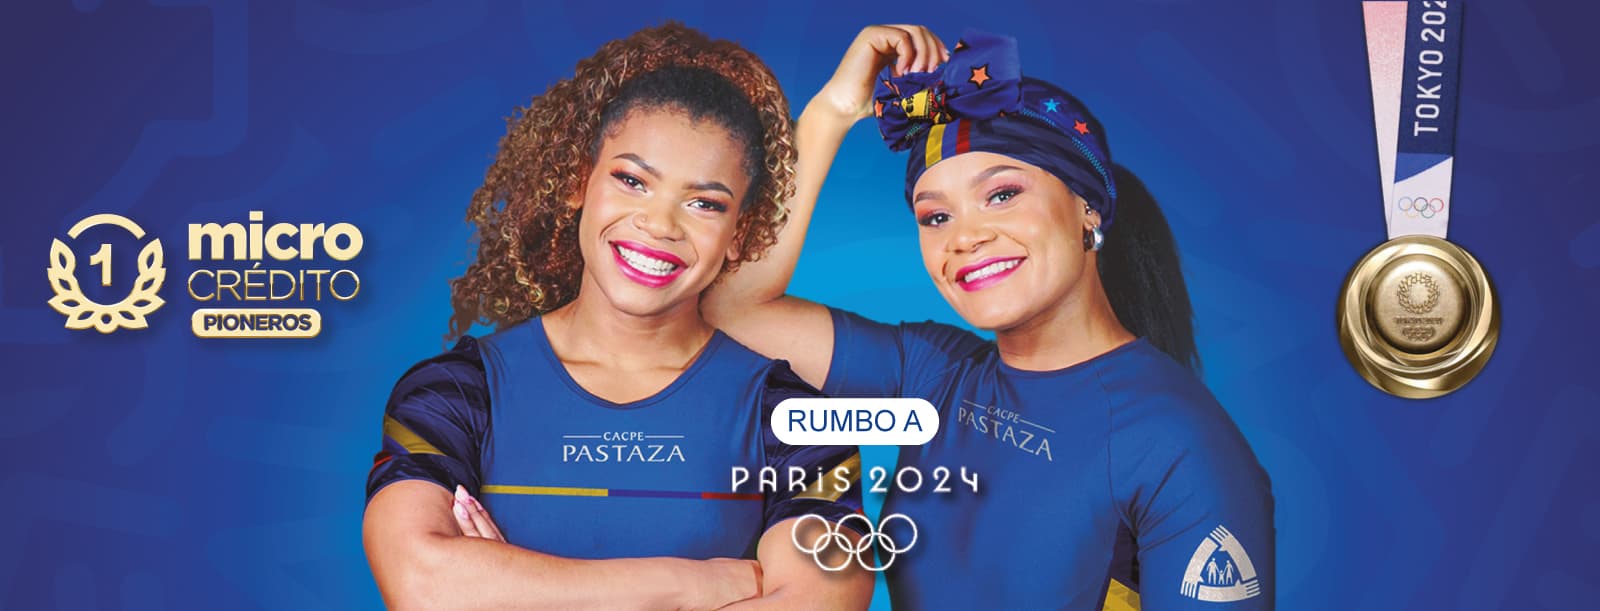 Angie y Neisi rumbo a Francia 2024